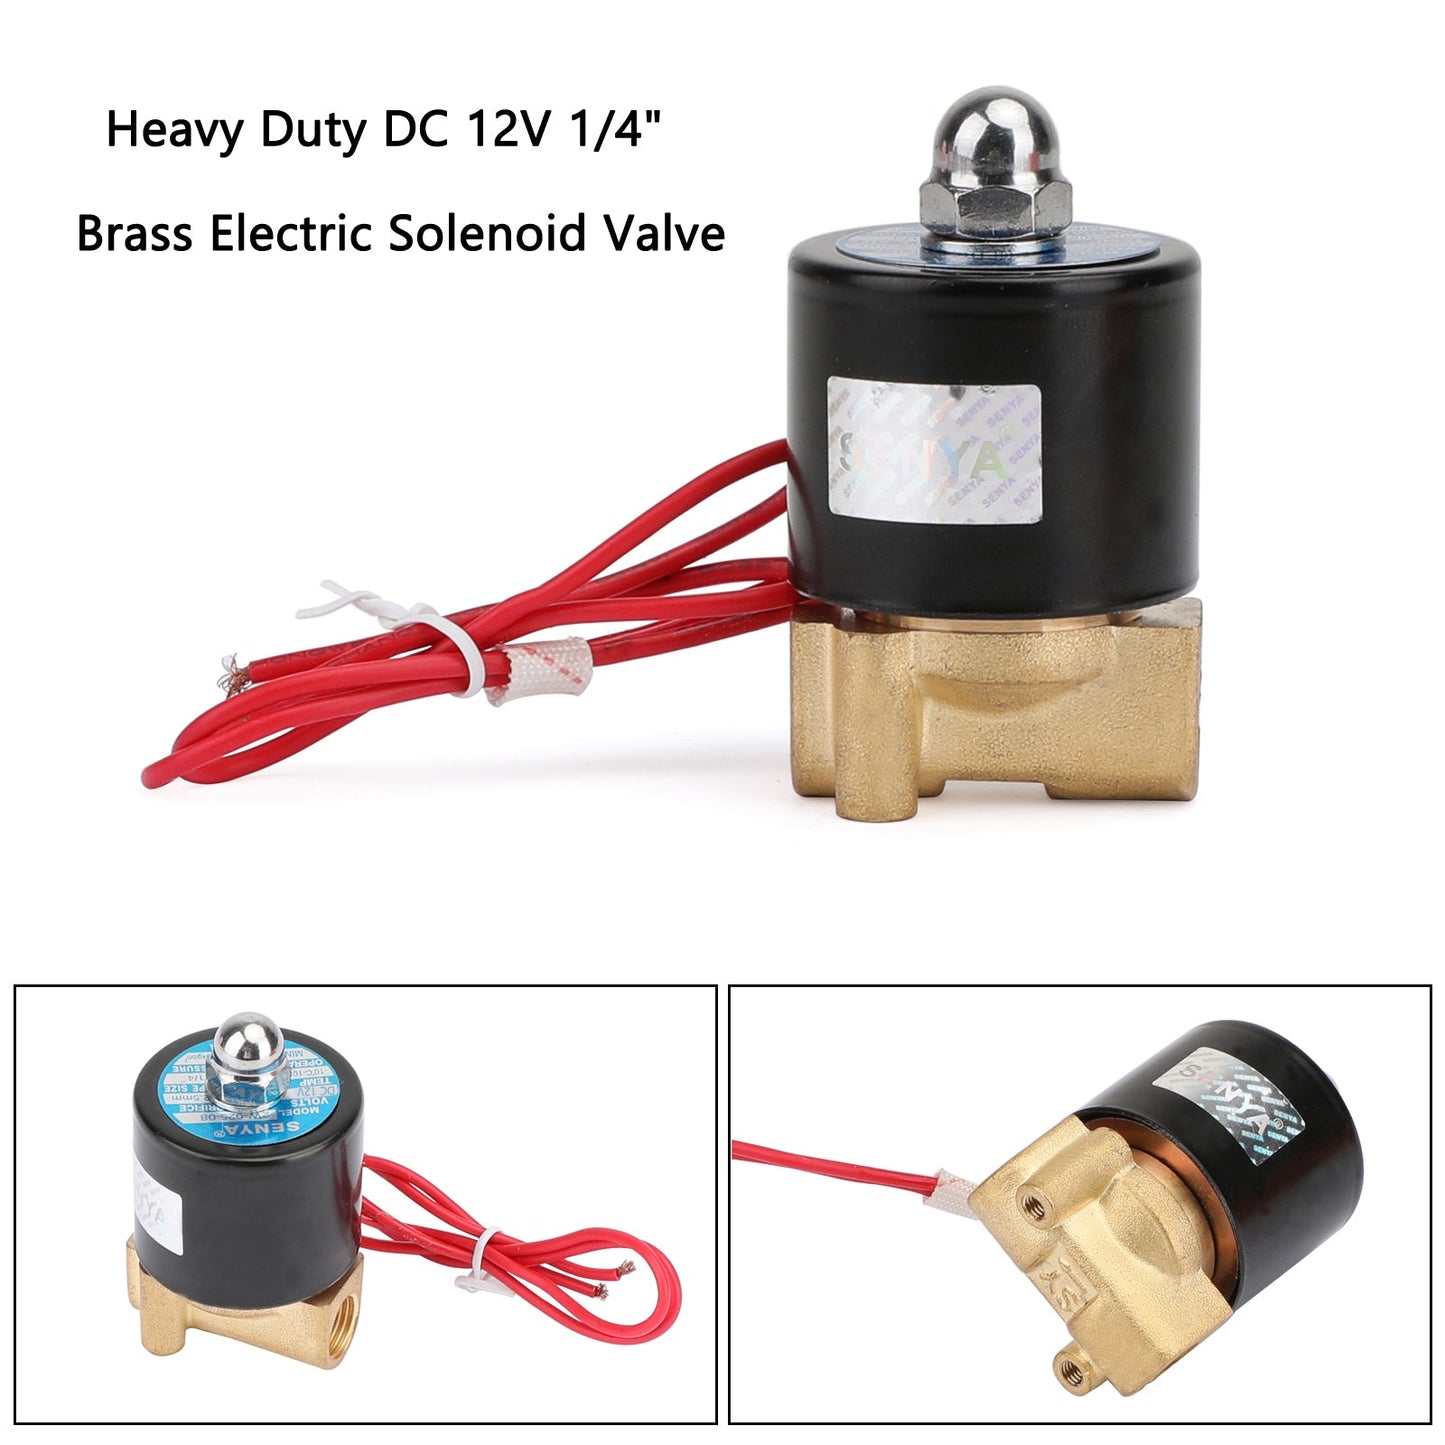 1/4" DC 12V Brass Normally Closed Electric Solenoid Valve BSP Gas Water Air N/C